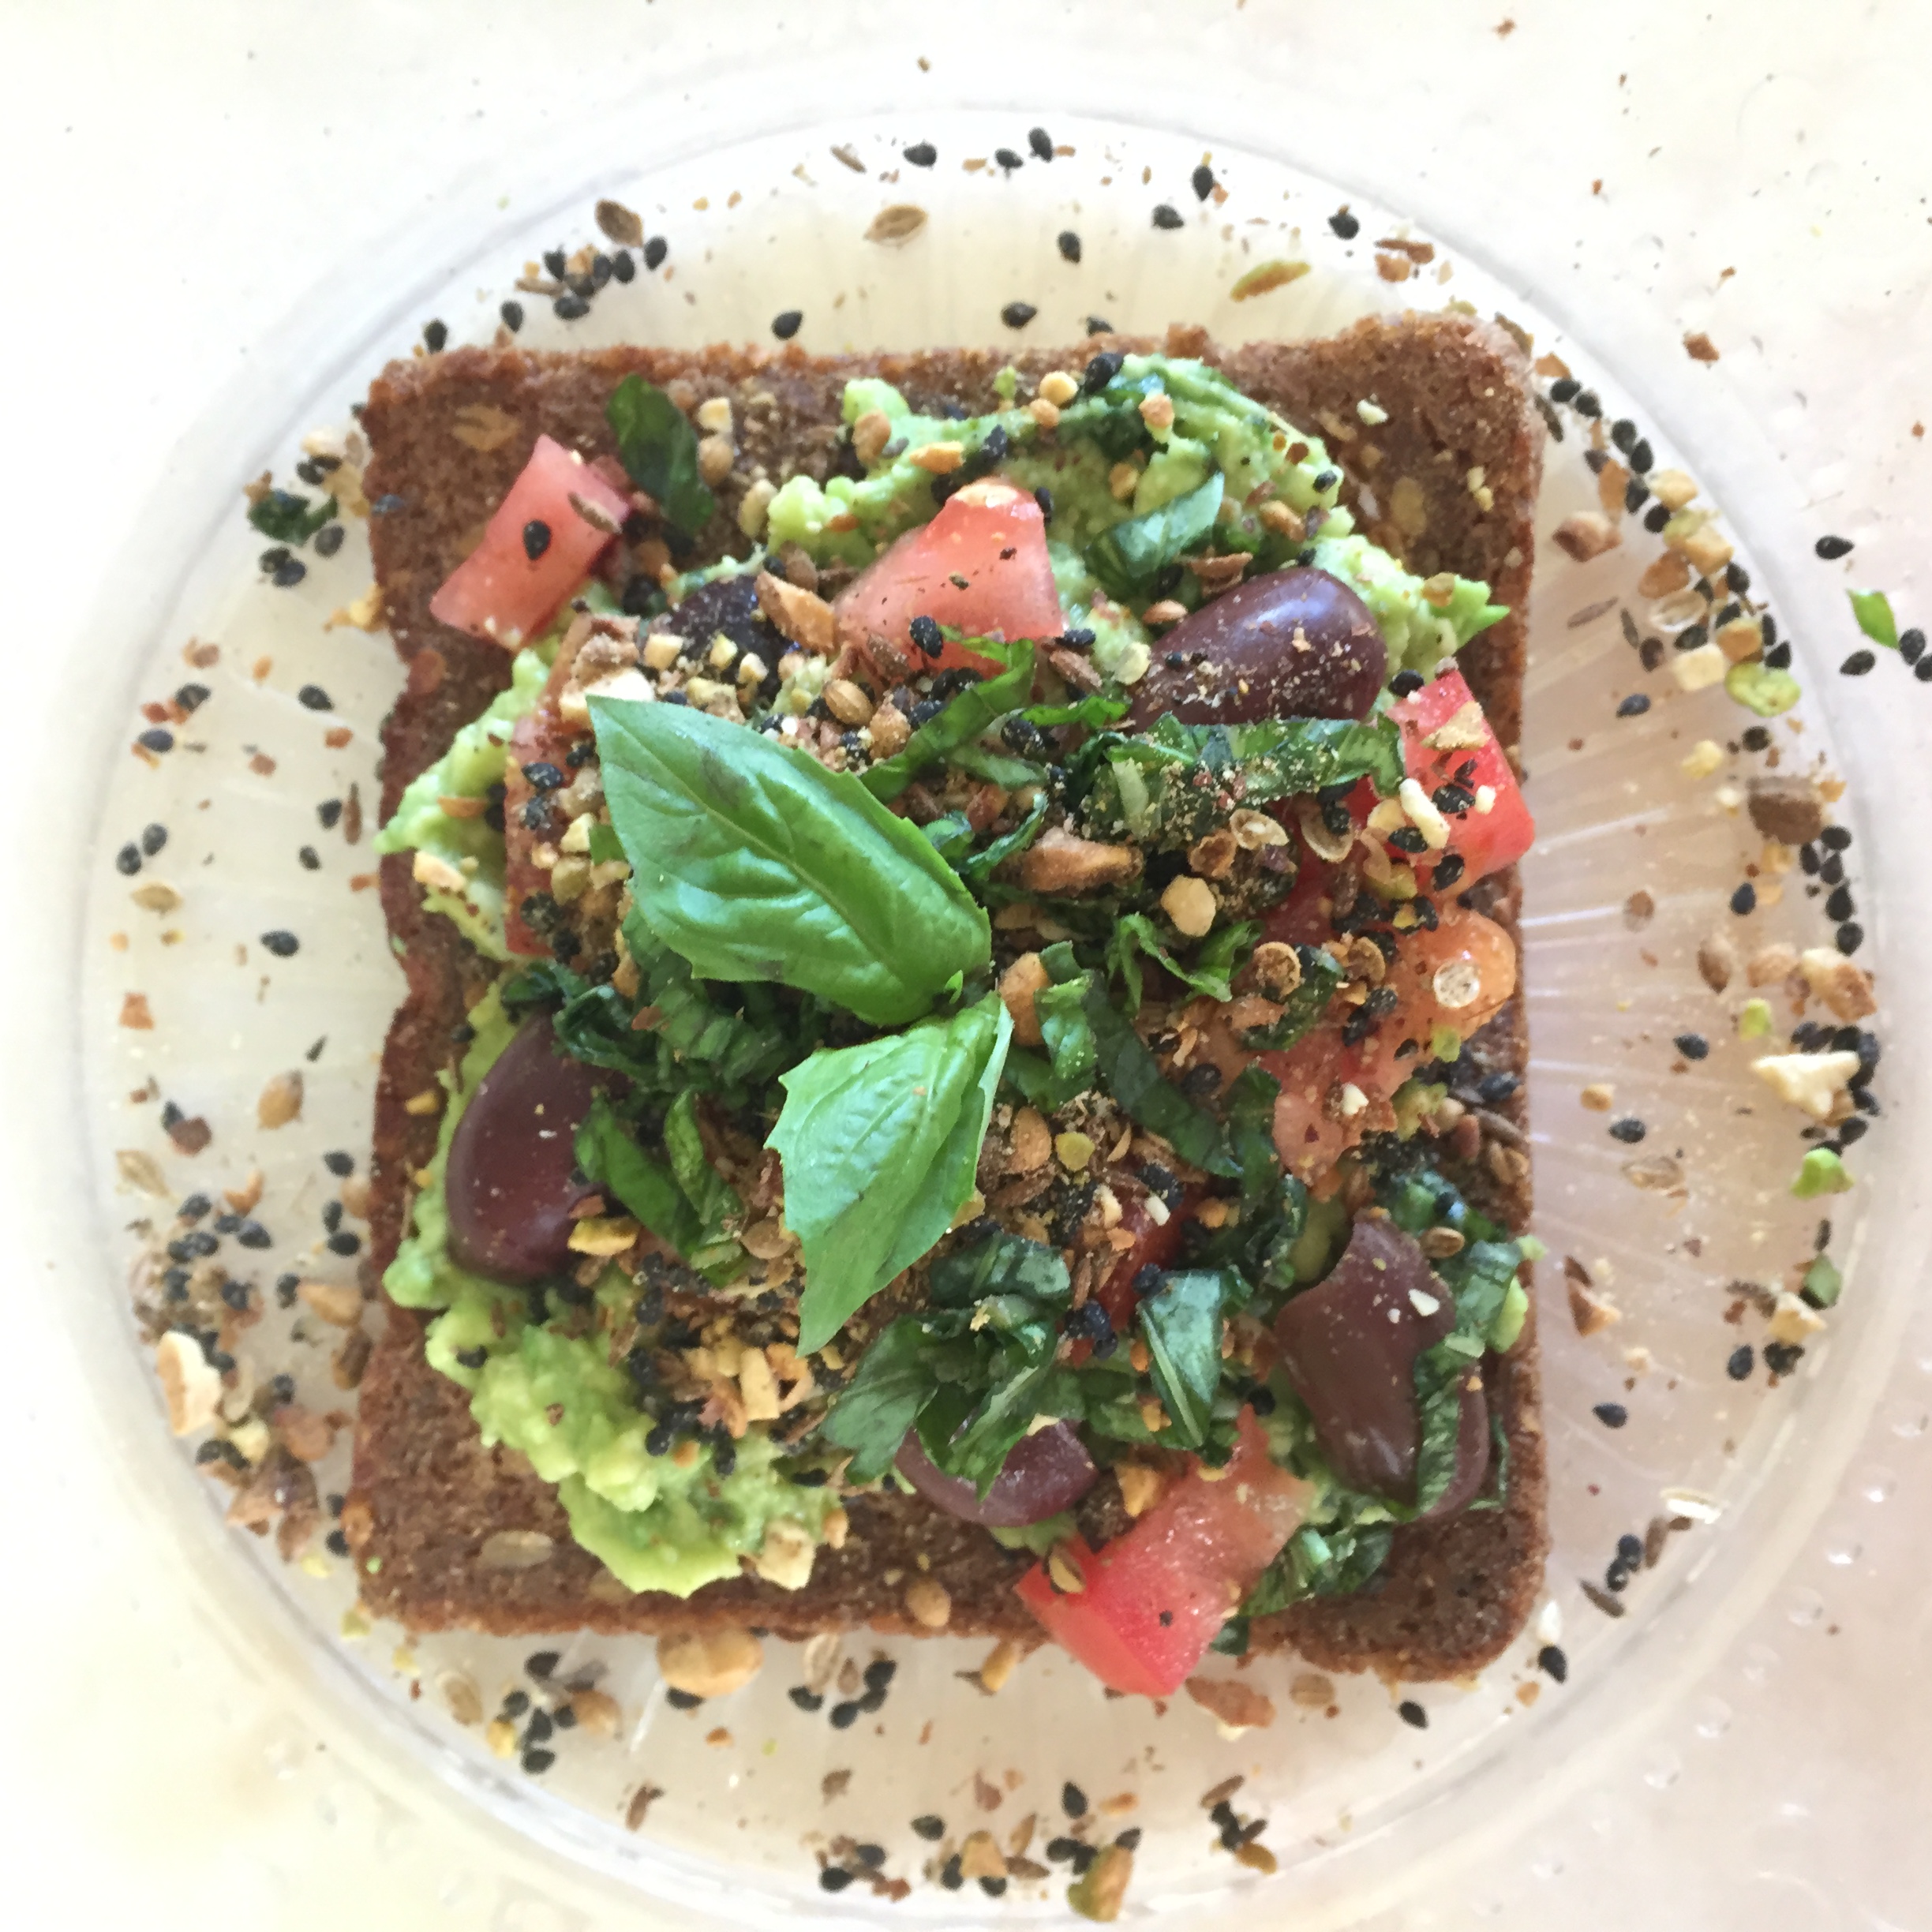 Avocado Toast with Olives, Tomatoes, Fresh Basil and Dukkah